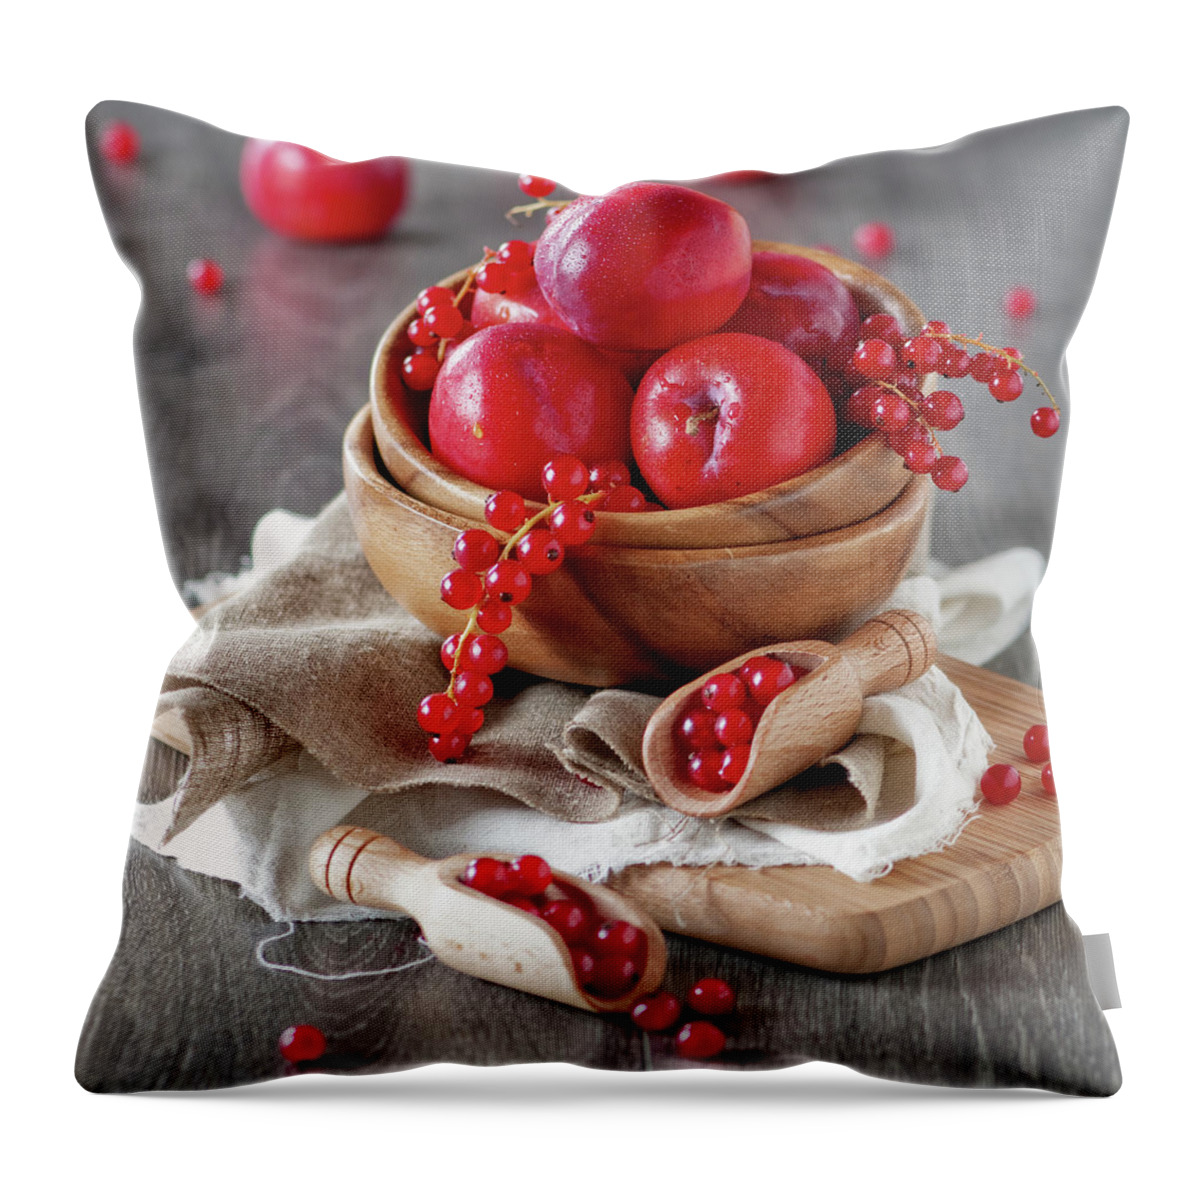 Plum Throw Pillow featuring the photograph Red Plums And Currant by Oxana Denezhkina